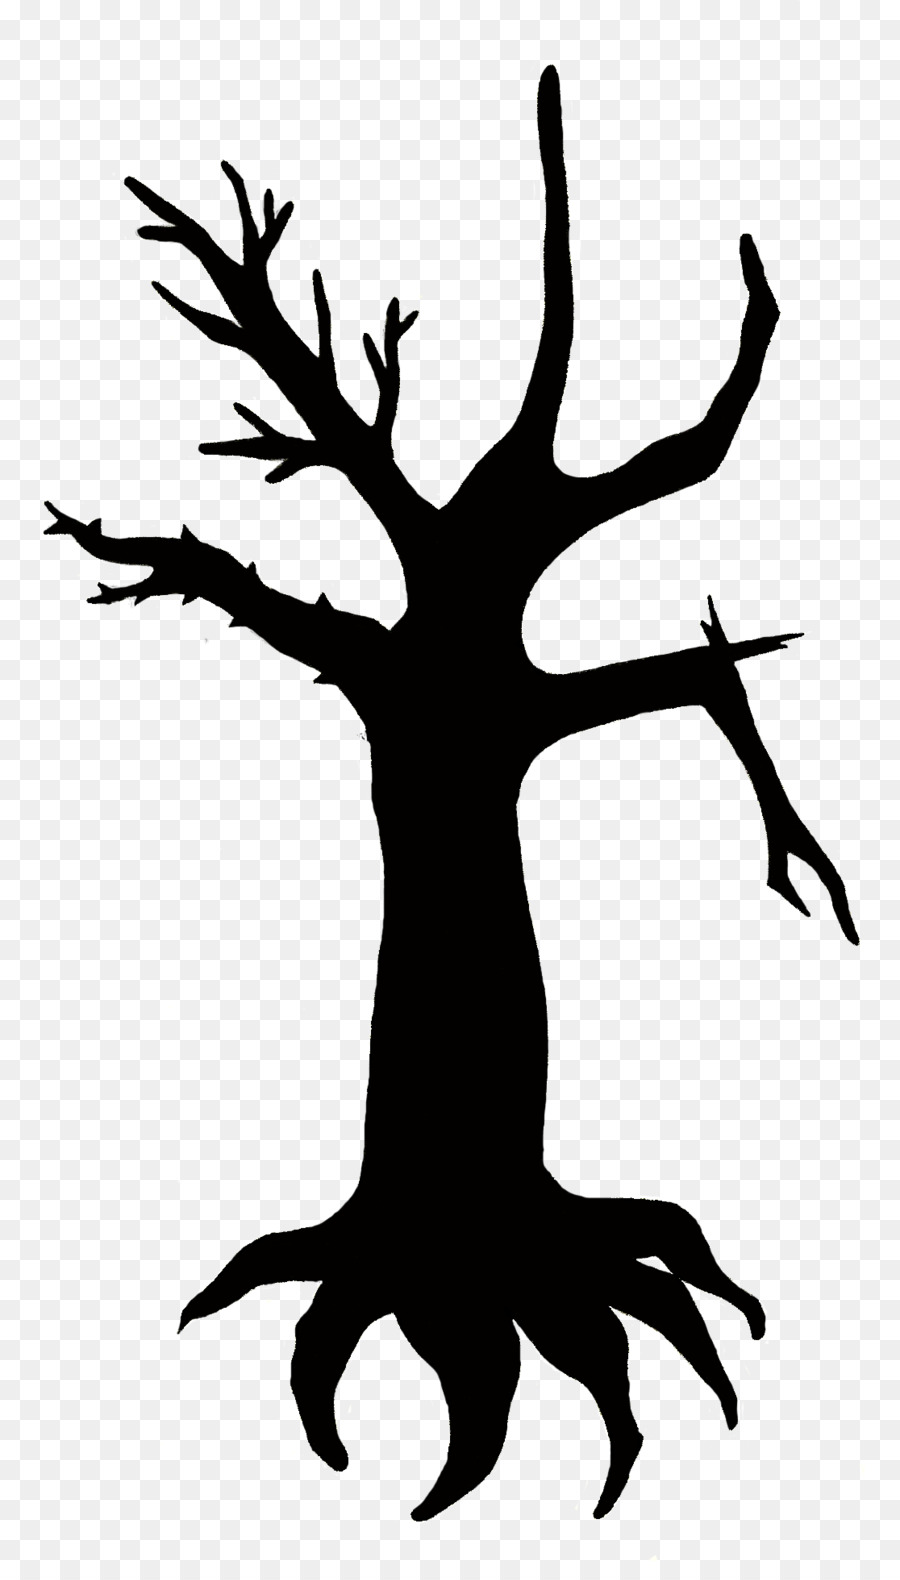 Tree Tattoo Oak Fir Clip art - Evergreen Tree Outline png download -  900*1561 - Free Transparent Tree png Download. - Clip Art Library